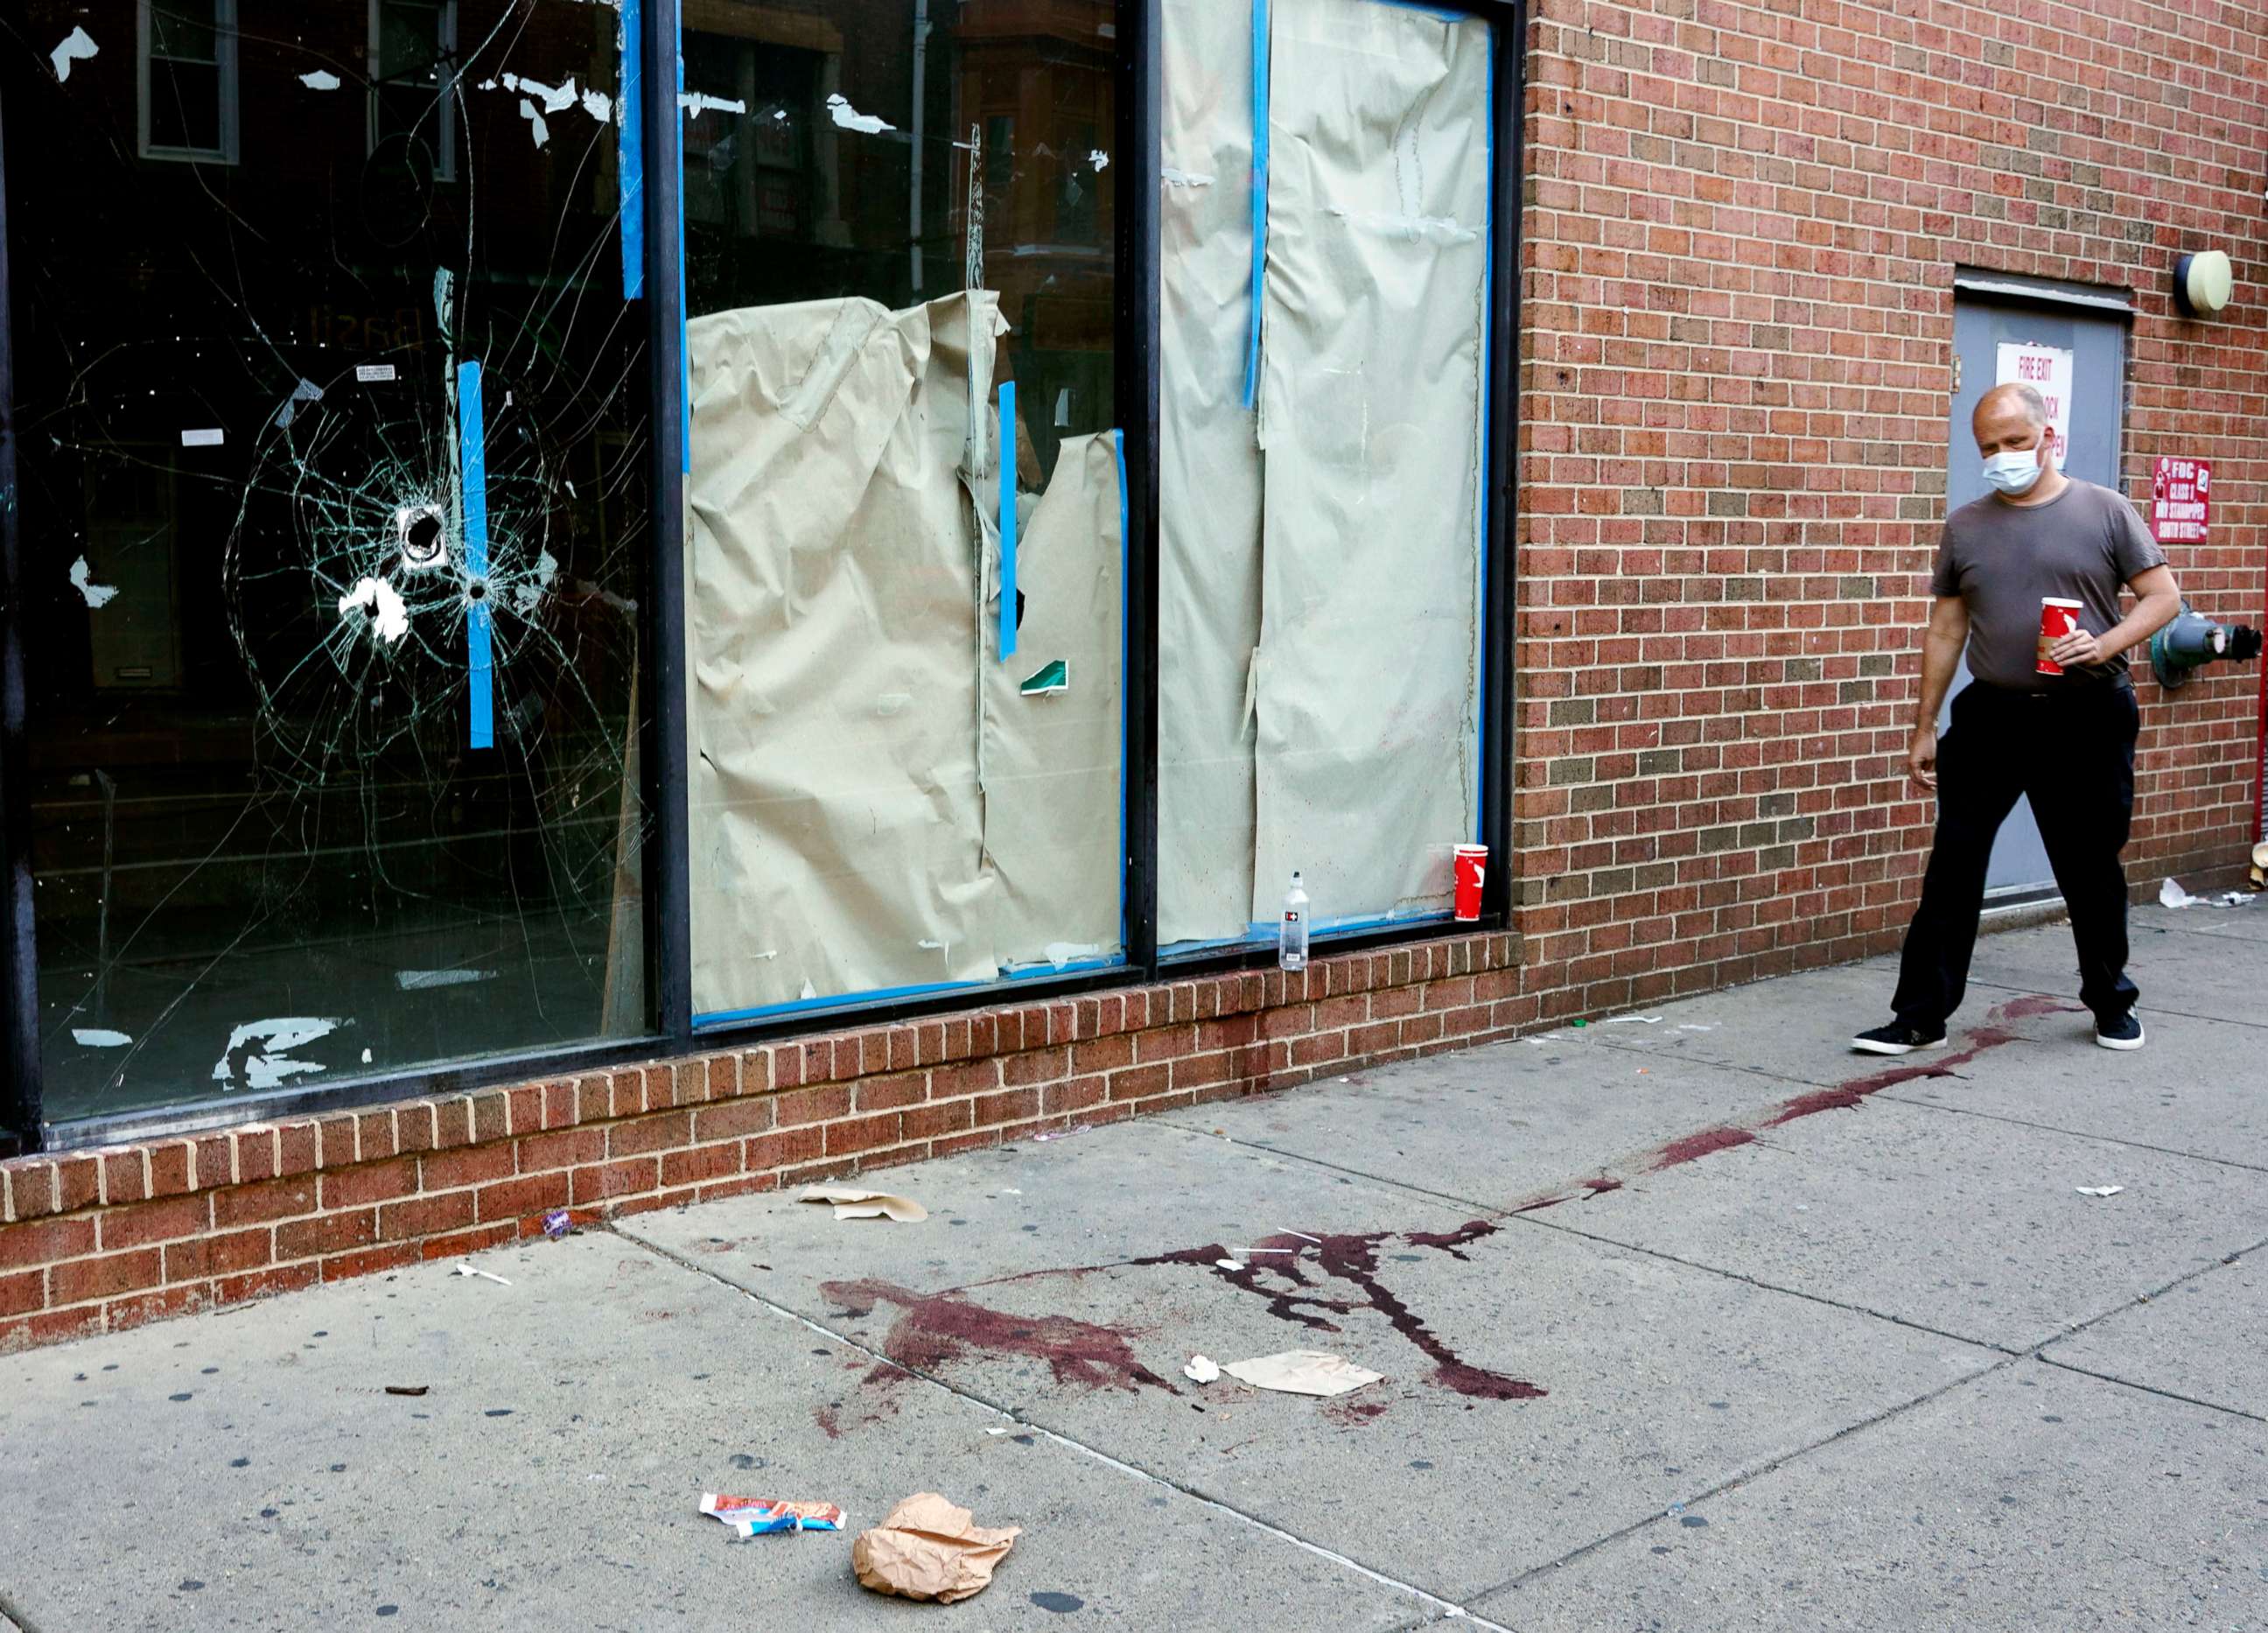 PHOTO: A person walks past the scene of a fatal overnight shooting on South Street in Philadelphia, June 5, 2022.